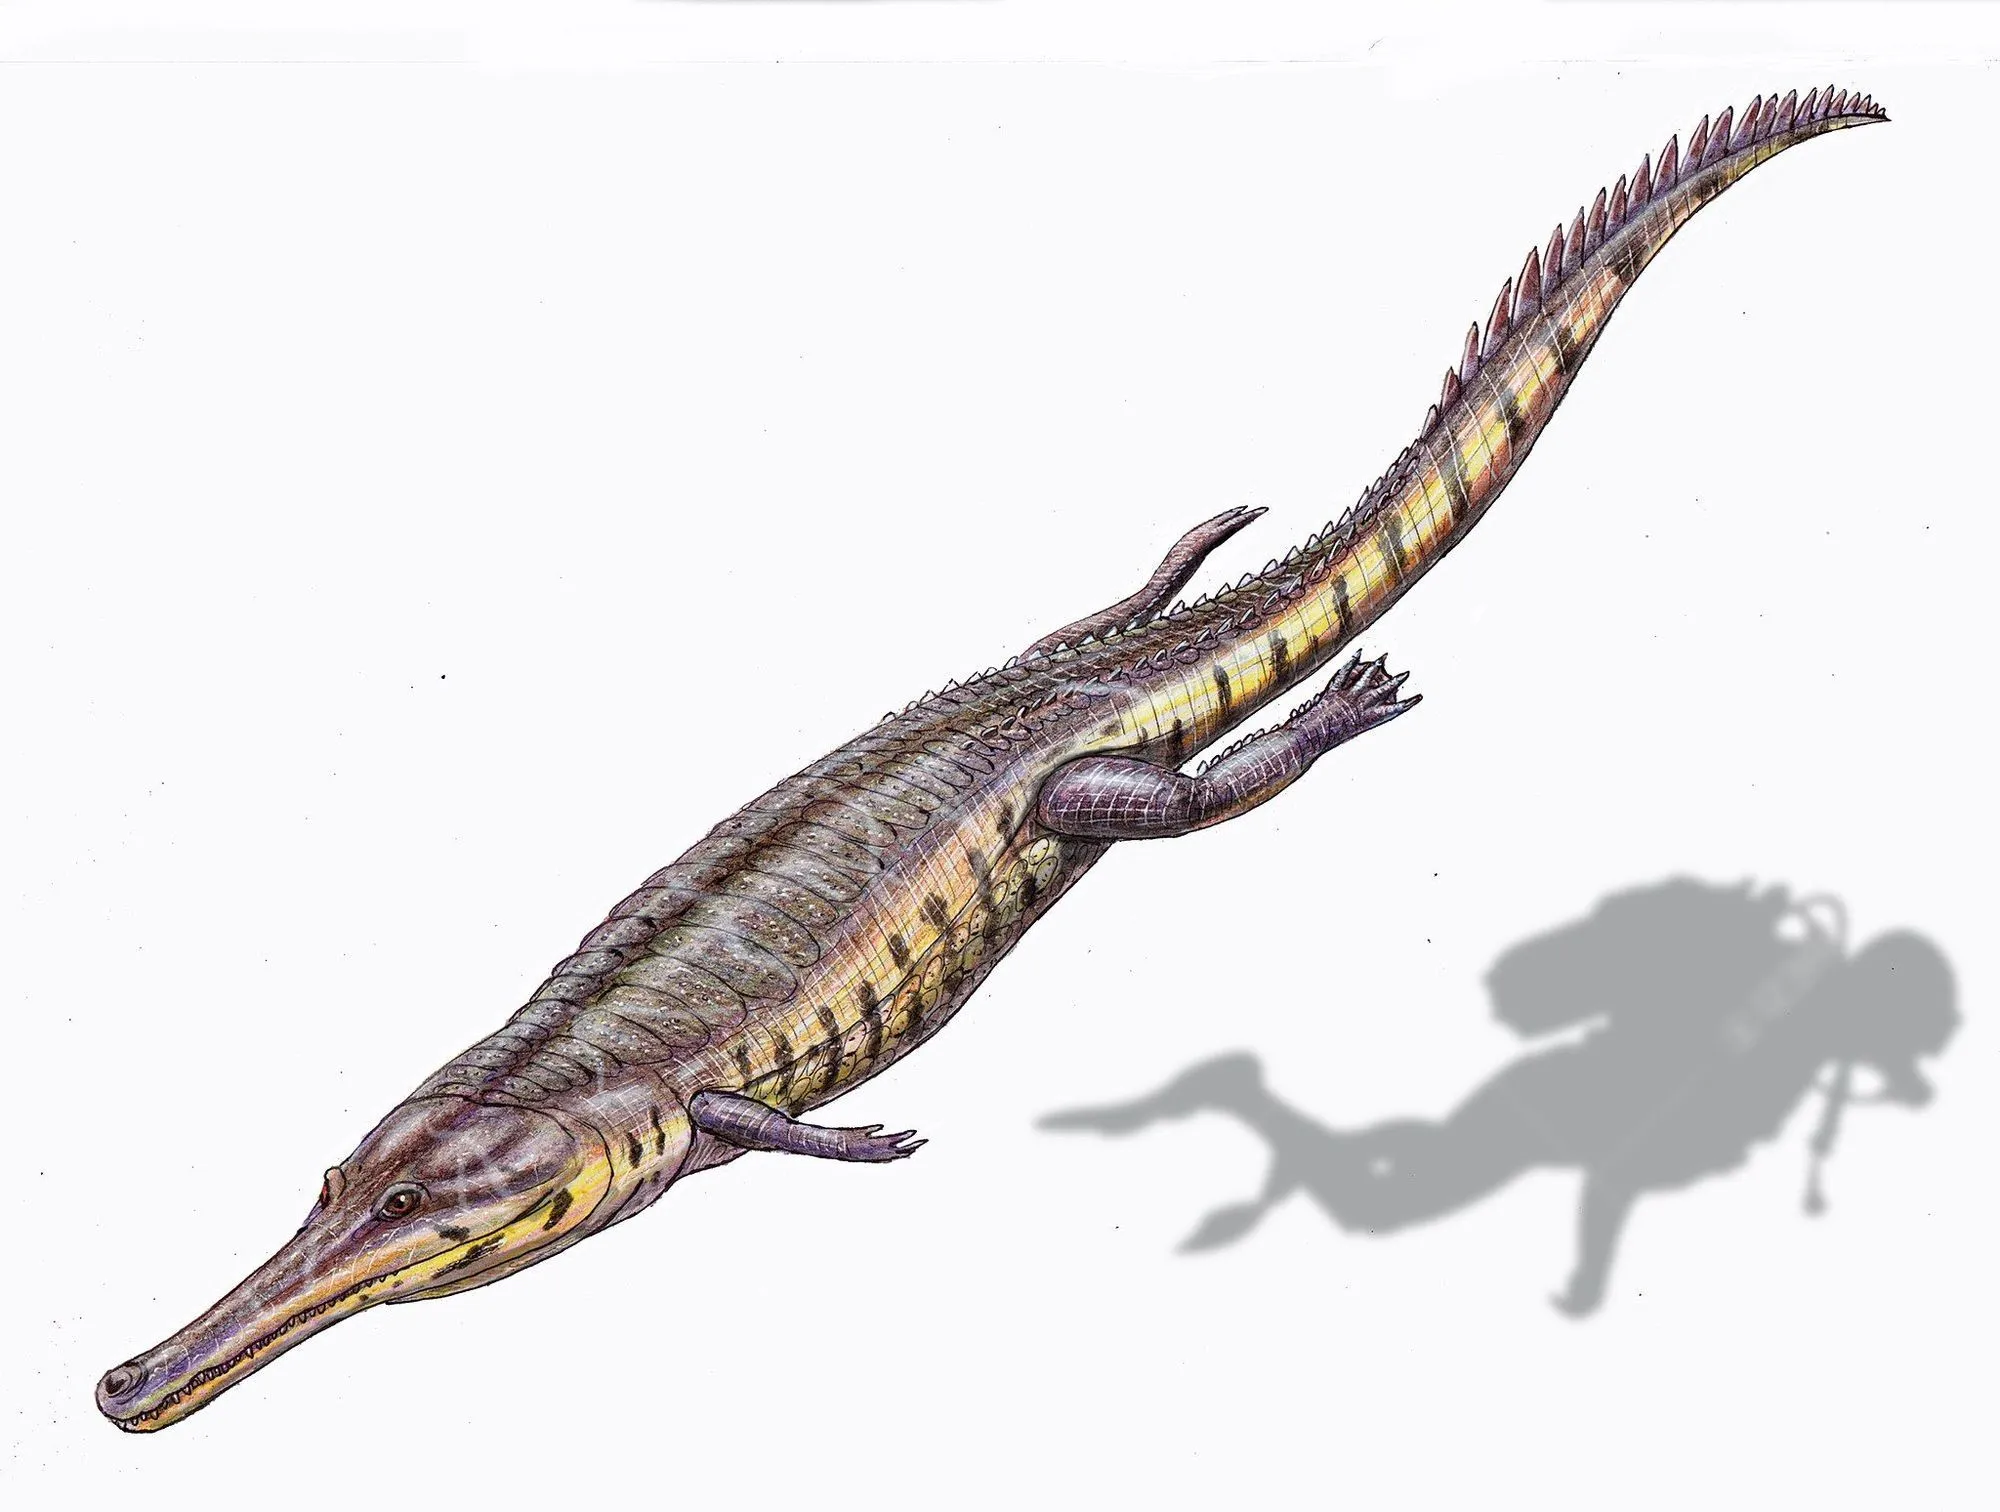 Learn about prehistoric crocodiles by reading these Machimosaurus facts